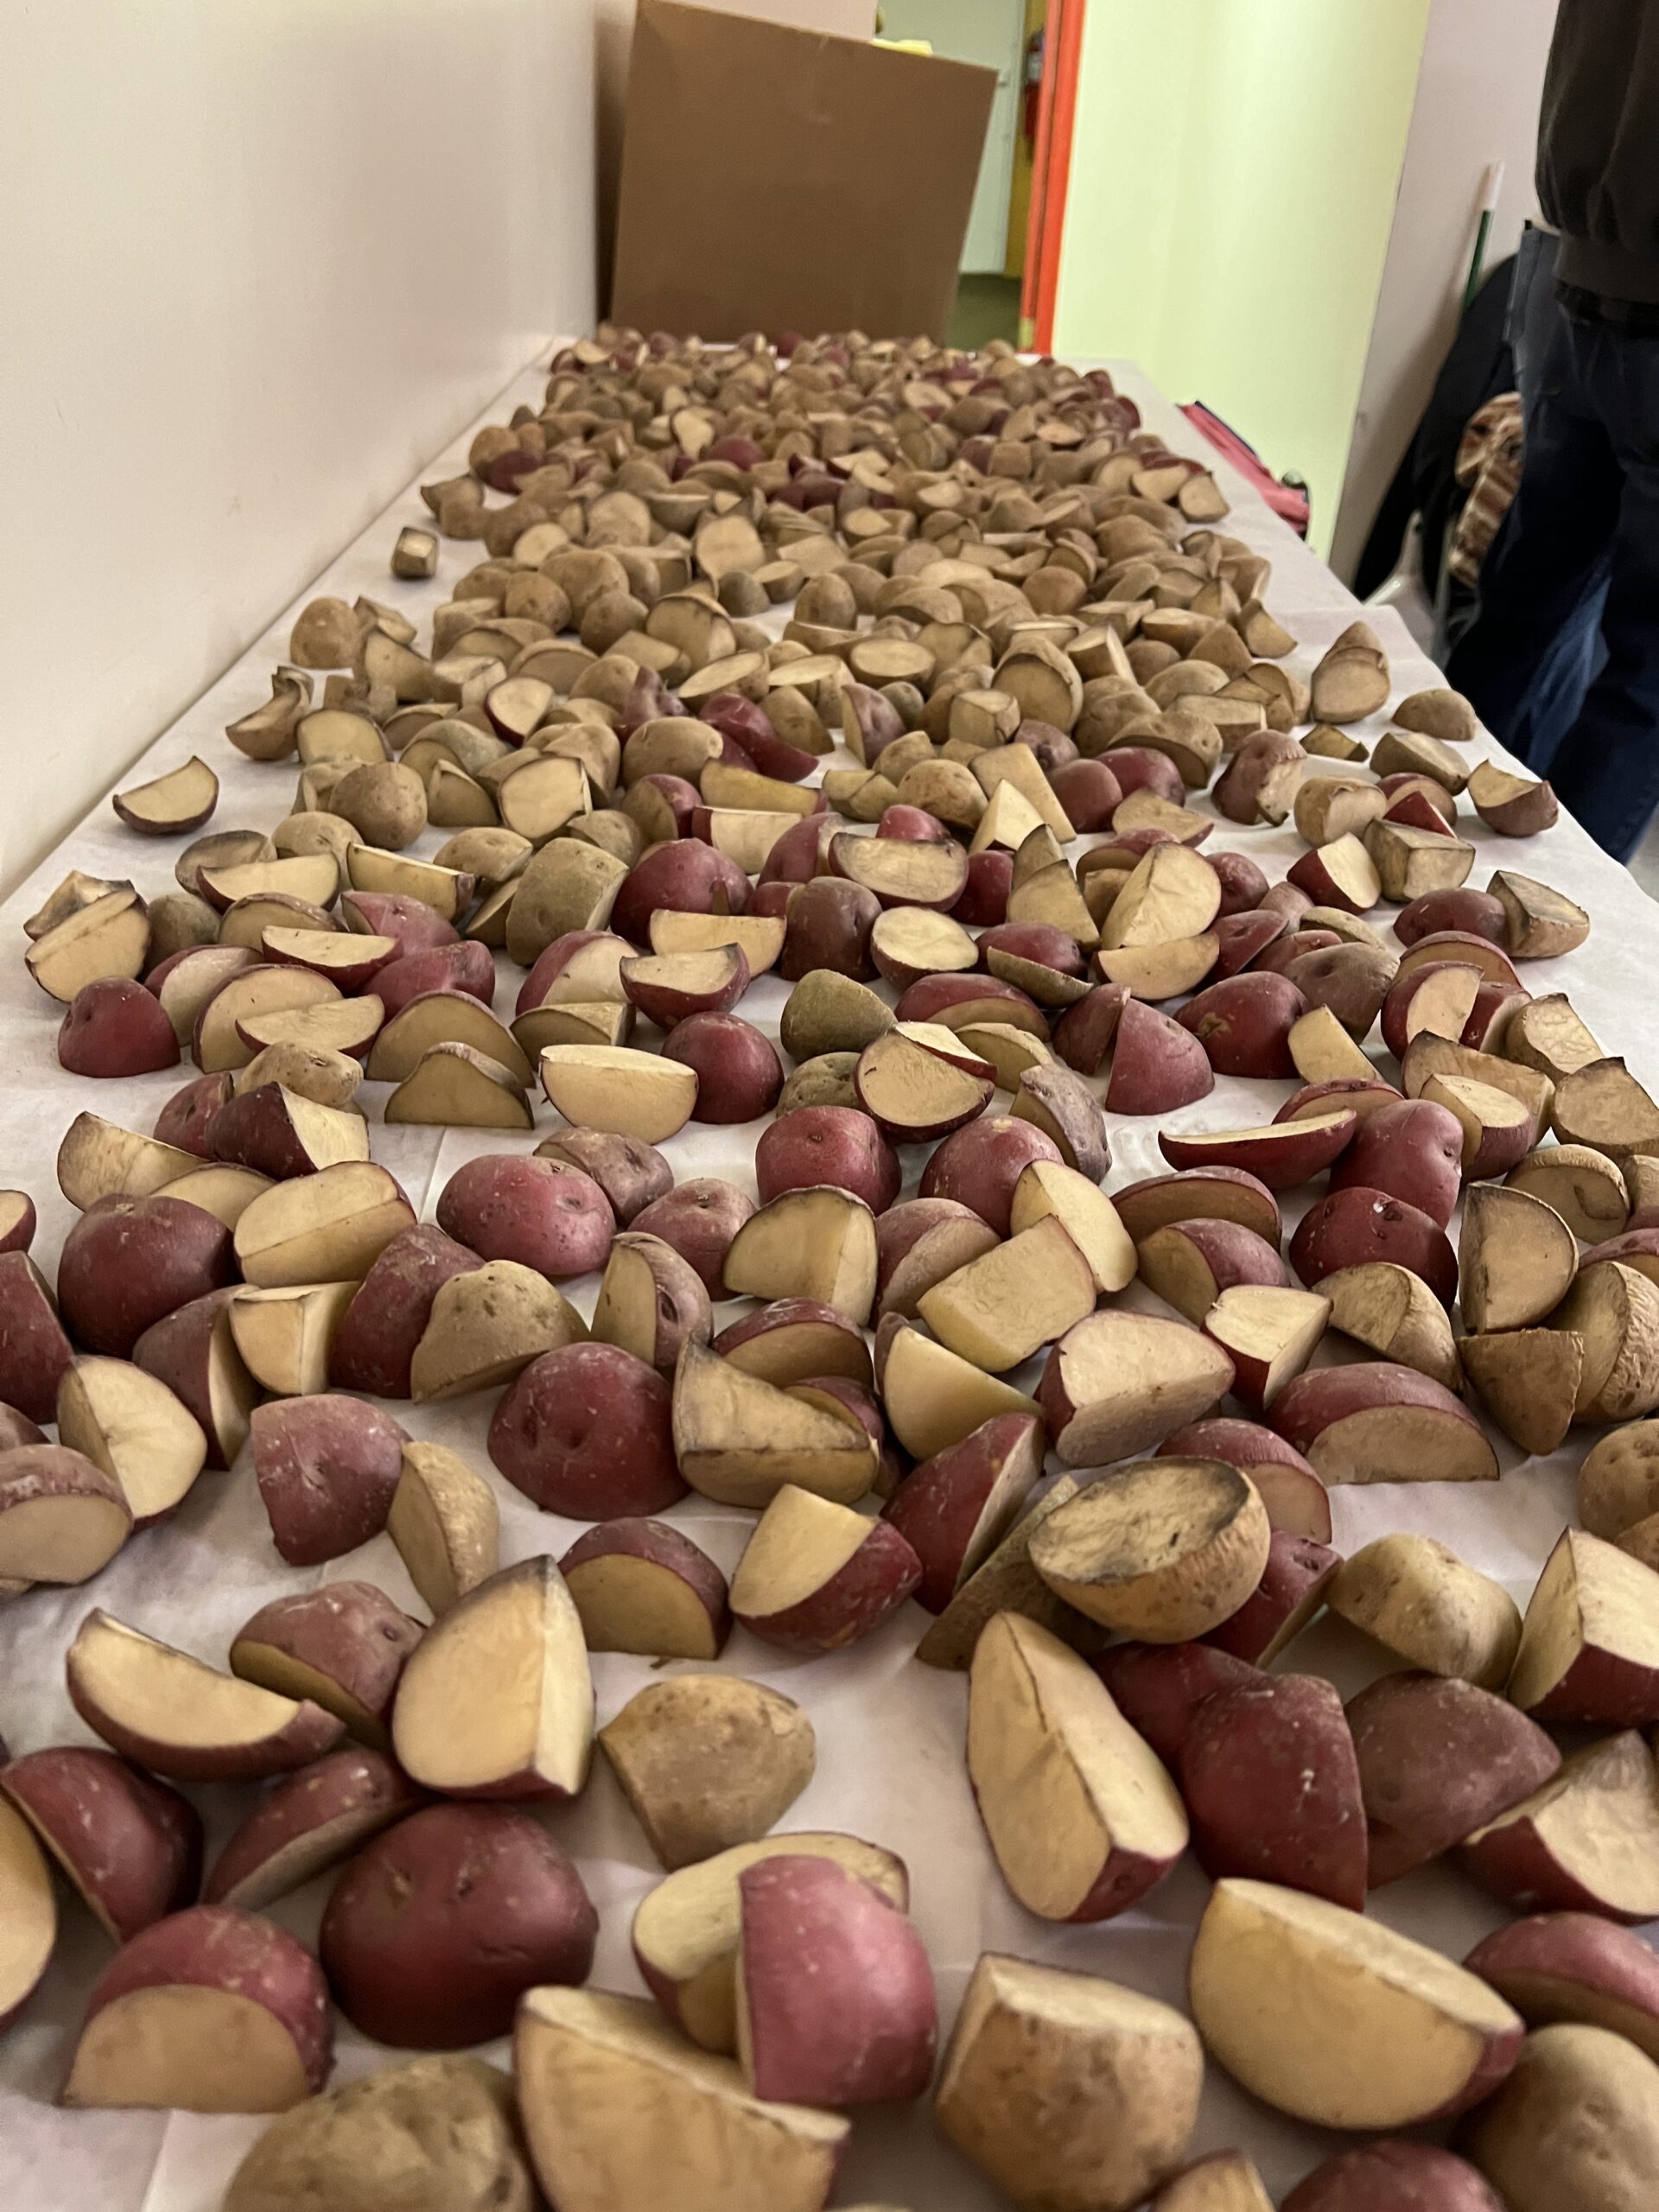 With Dupree’s help we were able to  provide enough potatoes to grow 100 grow bags. Our extra spuds all went to Pam to plant at Firefly Garden!